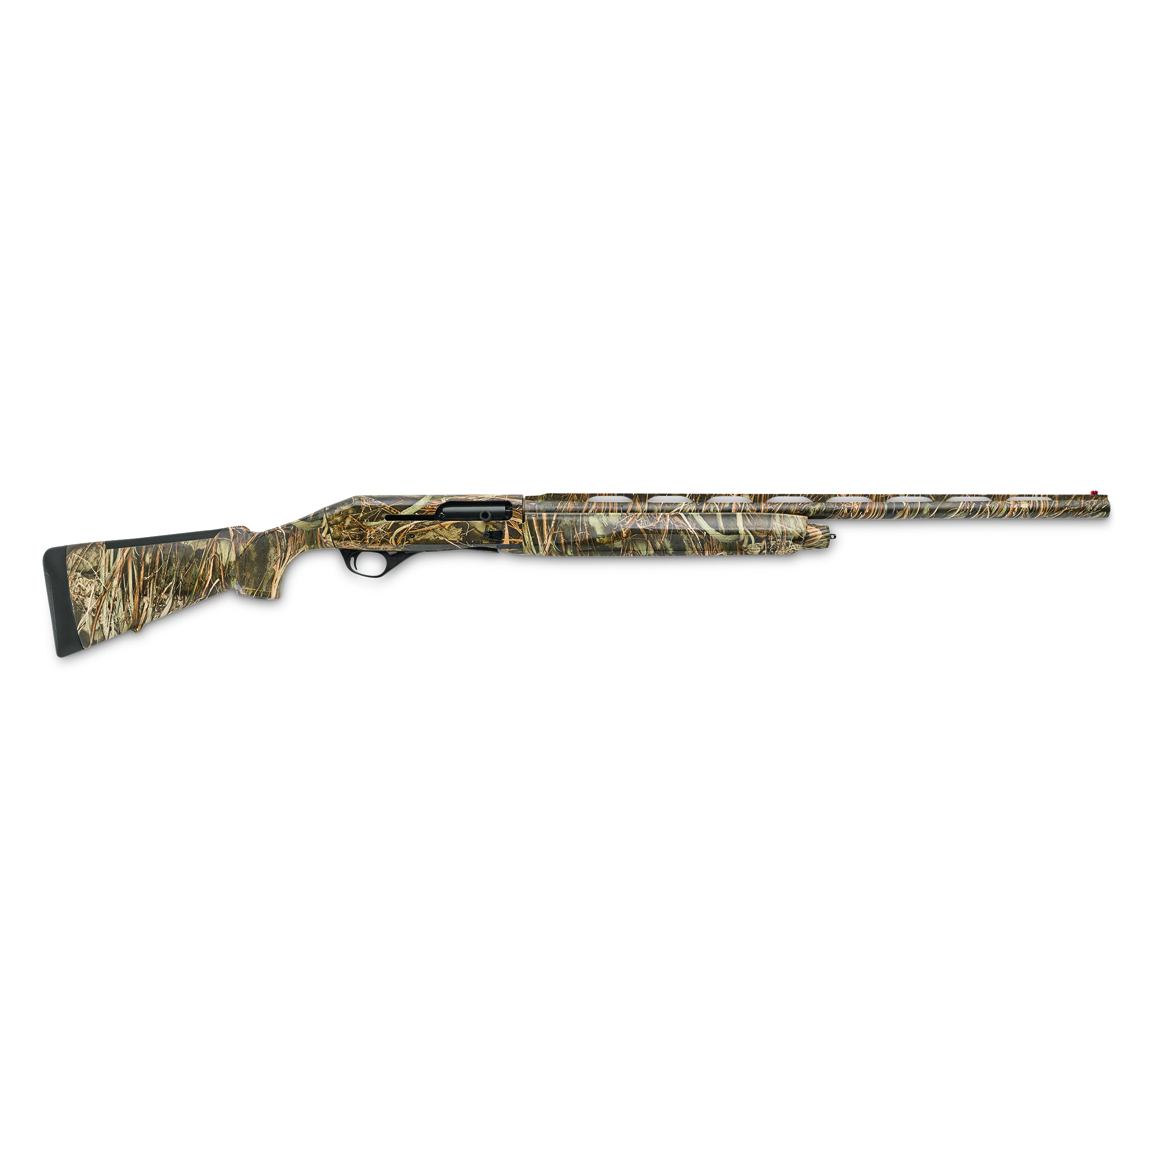 Stoeger M3500, Semi-automatic, 12 Gauge, 28" Barrel, Realtree MAX-7 Stock, 4+1 Rounds